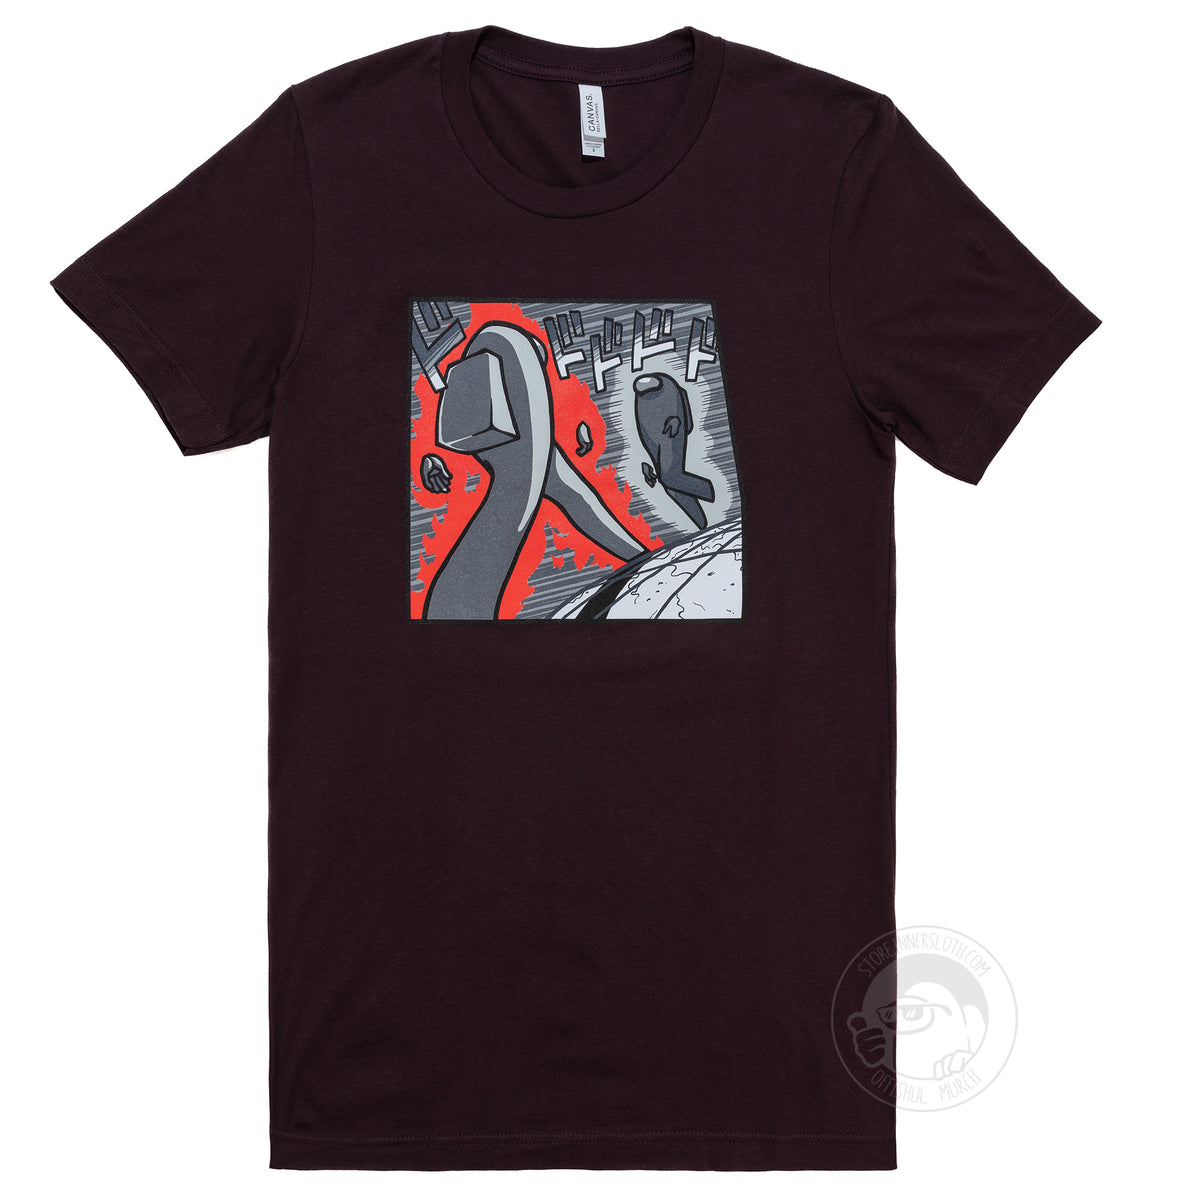  A flat lay photograph of the Among Us: Menacing T-Shirt. The maroon shirt depicts one long-legged crewmate striding to another, replicating the iconic scene from JoJo&#39;s Bizarre Adventure.